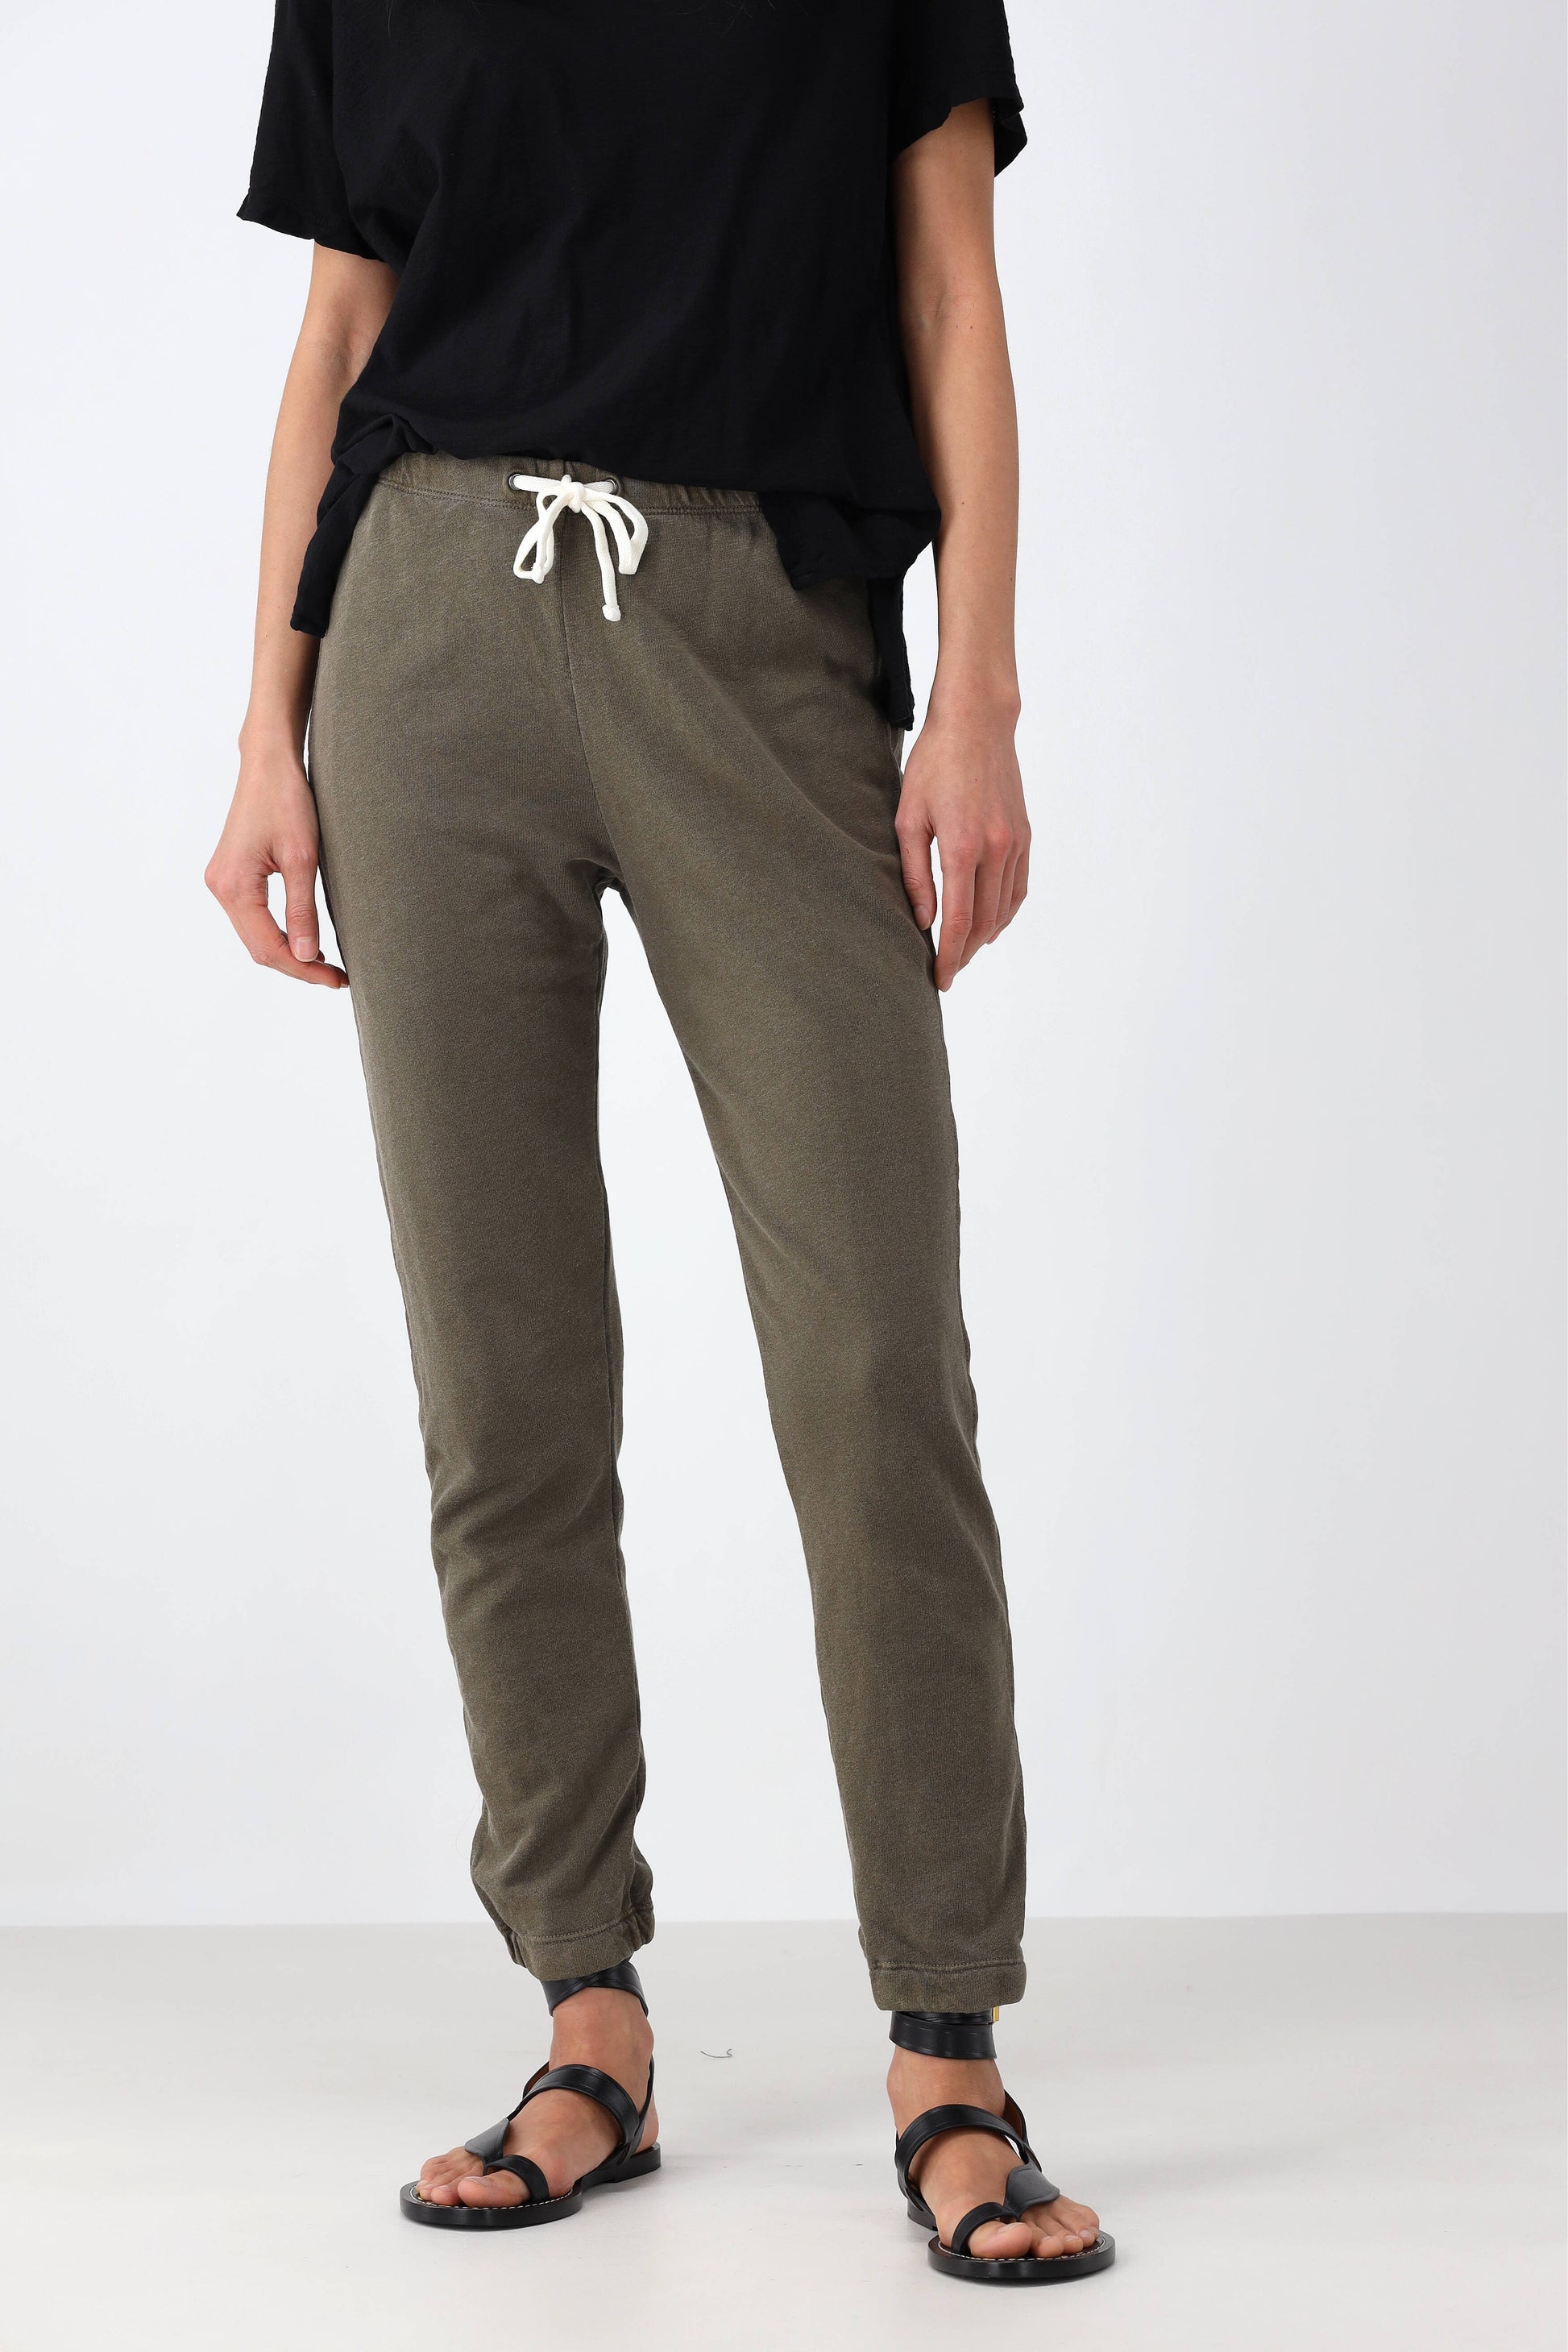 Sweatpants French Terry in Old WhiskeyJames Perse - Anita Hass